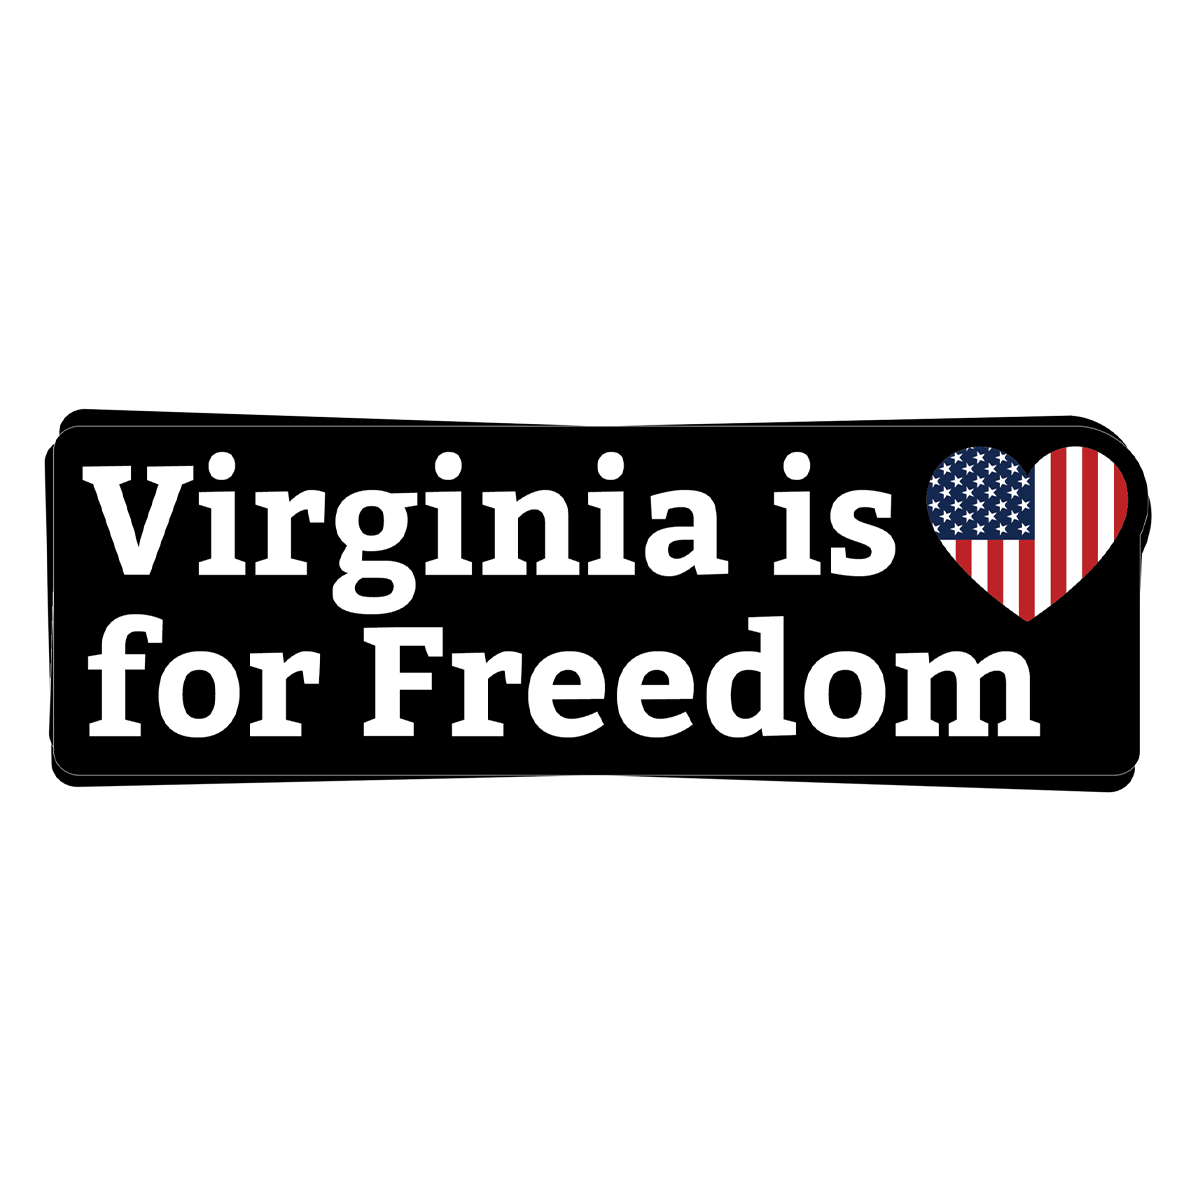 "Virginia is For Freedom" - Decal